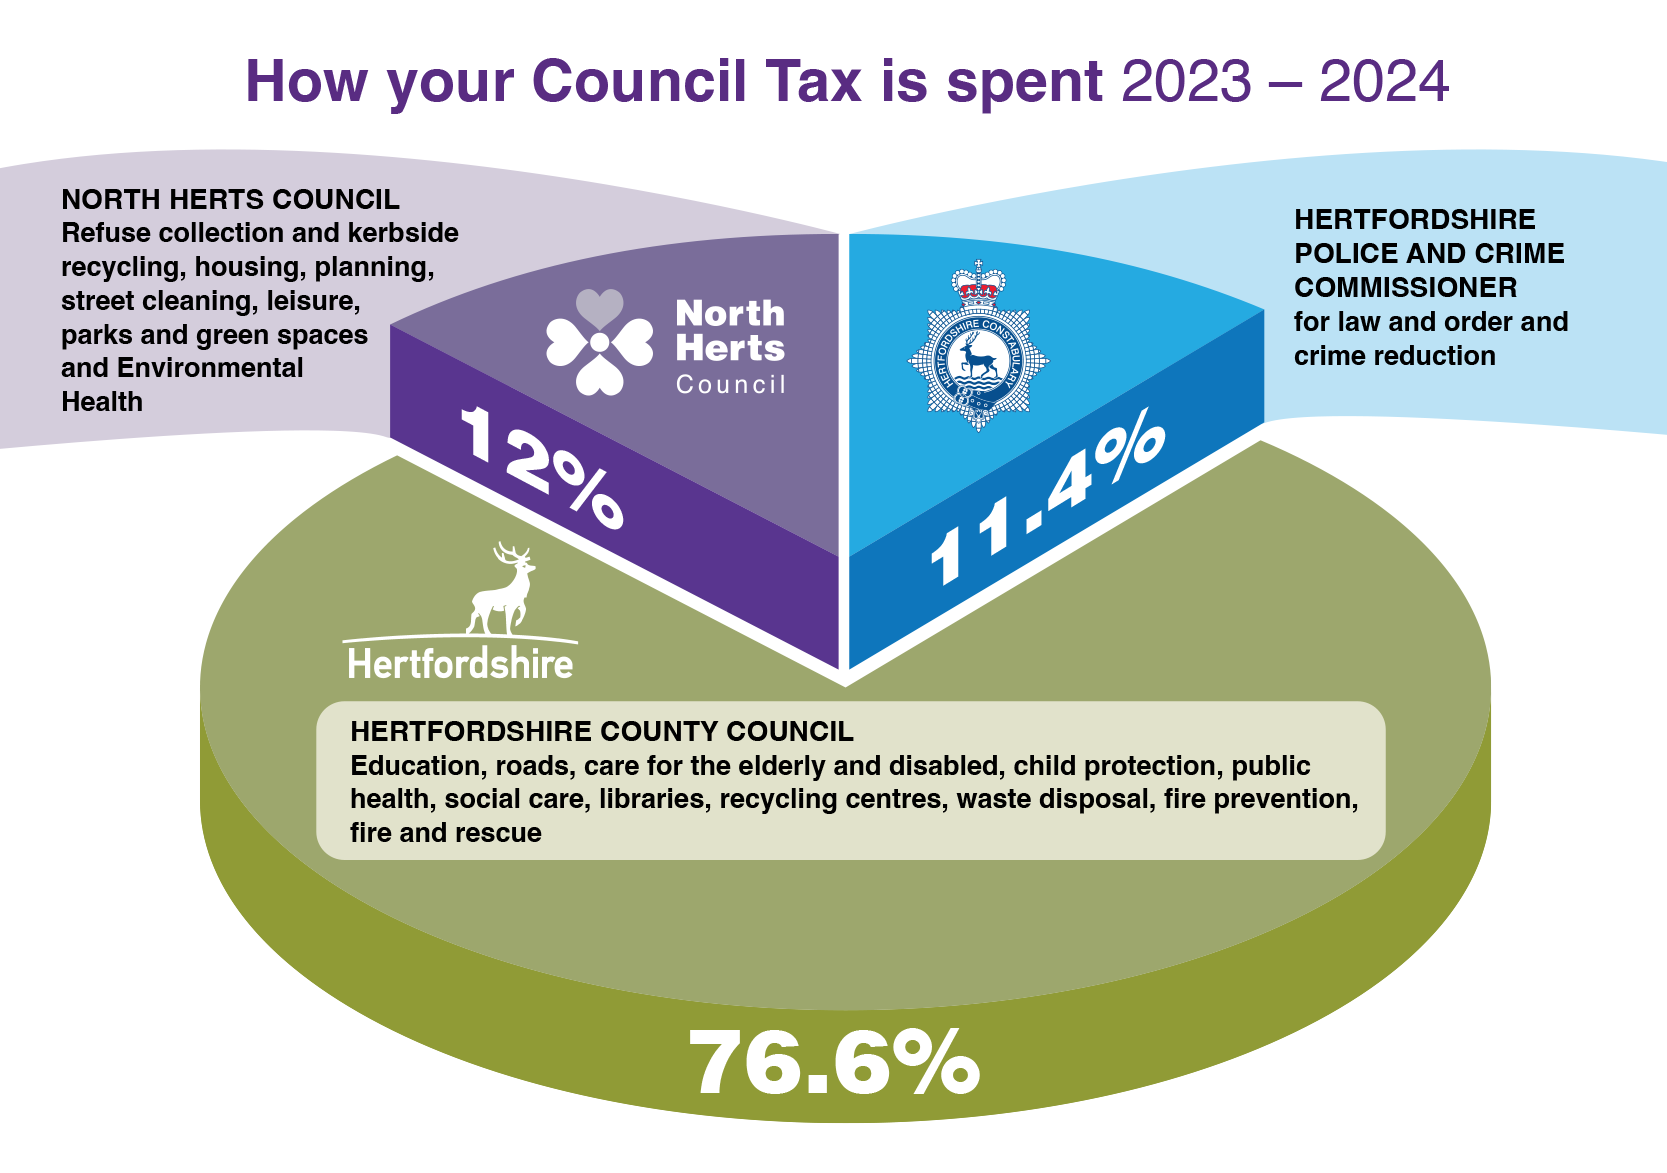 How your Council Tax is spent 2023-24 - North Herts Council 12%; Herts Police and Crime Commissioner 11.4%; Hertfordshire County Council 76.6%